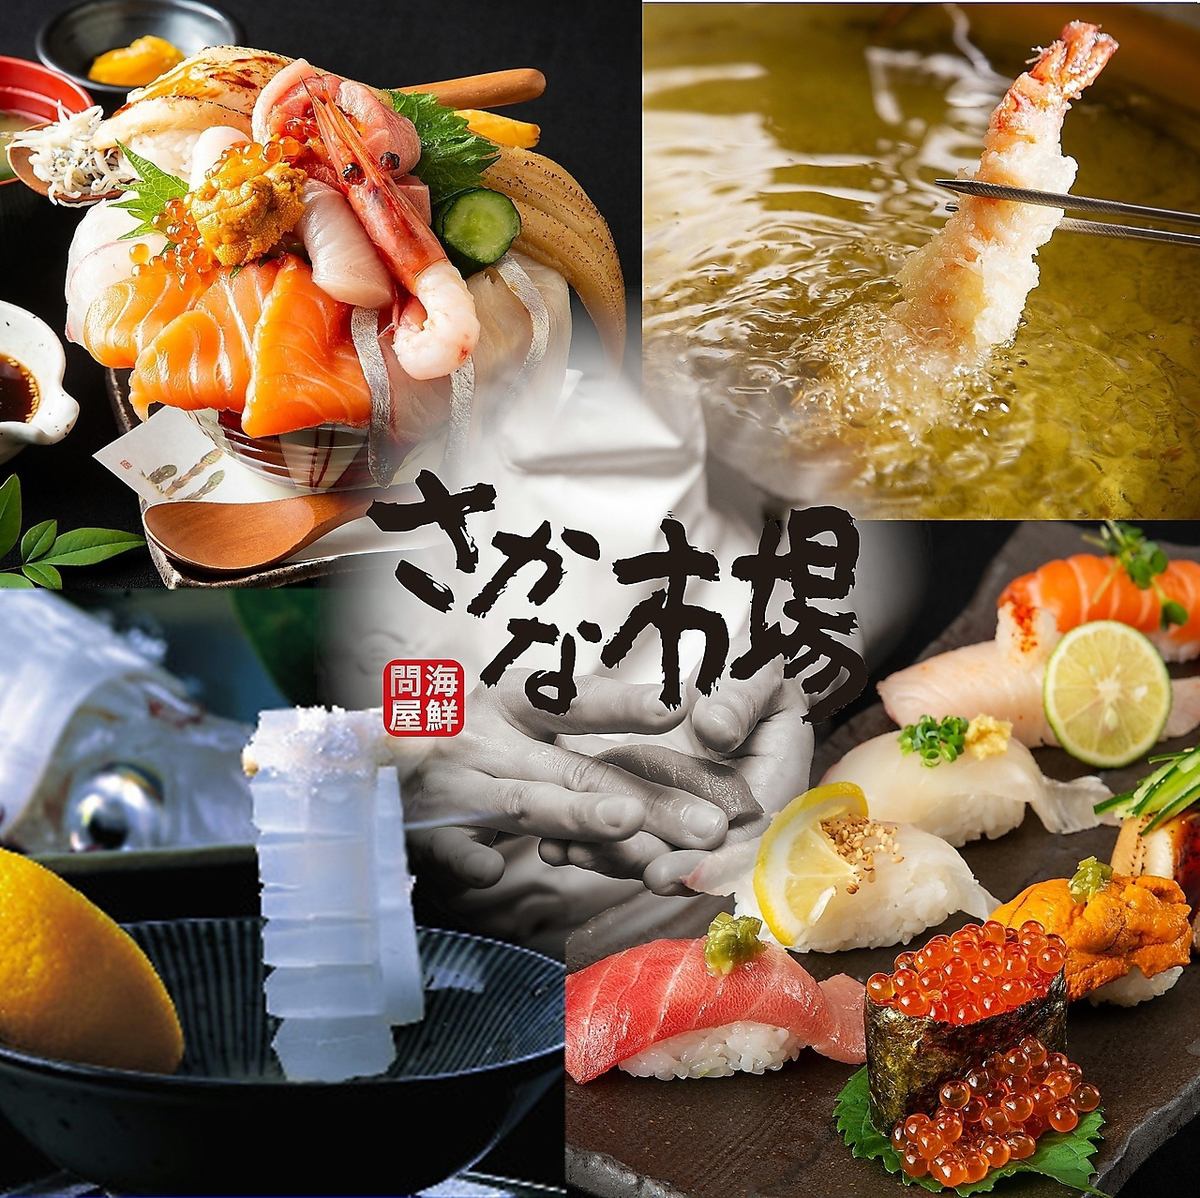 The course where you can enjoy fresh Setouchi fish comes with all-you-can-drink for 3 hours and starts at 4000 yen!